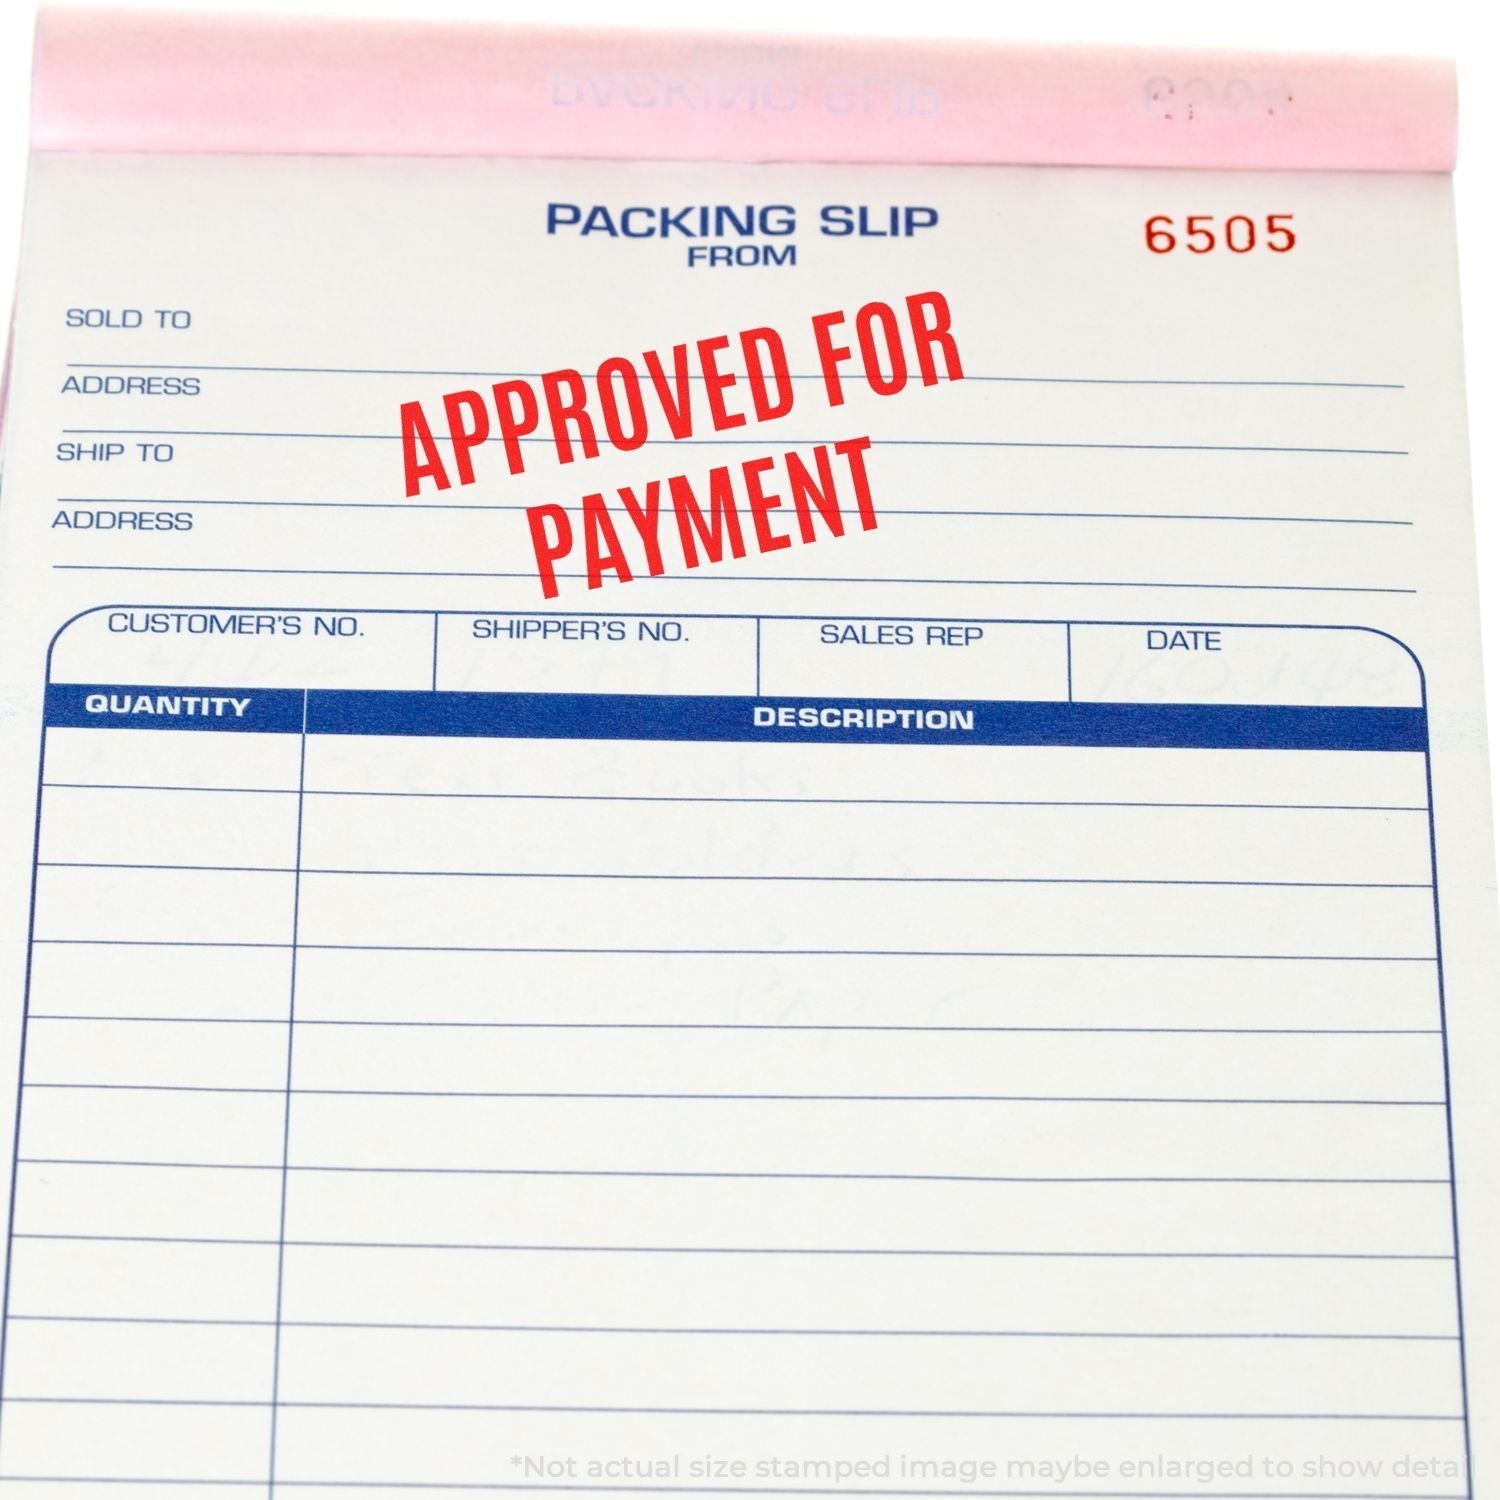 A self-inking stamp with a stamped image showing how the text "APPROVED FOR PAYMENT" in a narrow font is displayed after stamping.